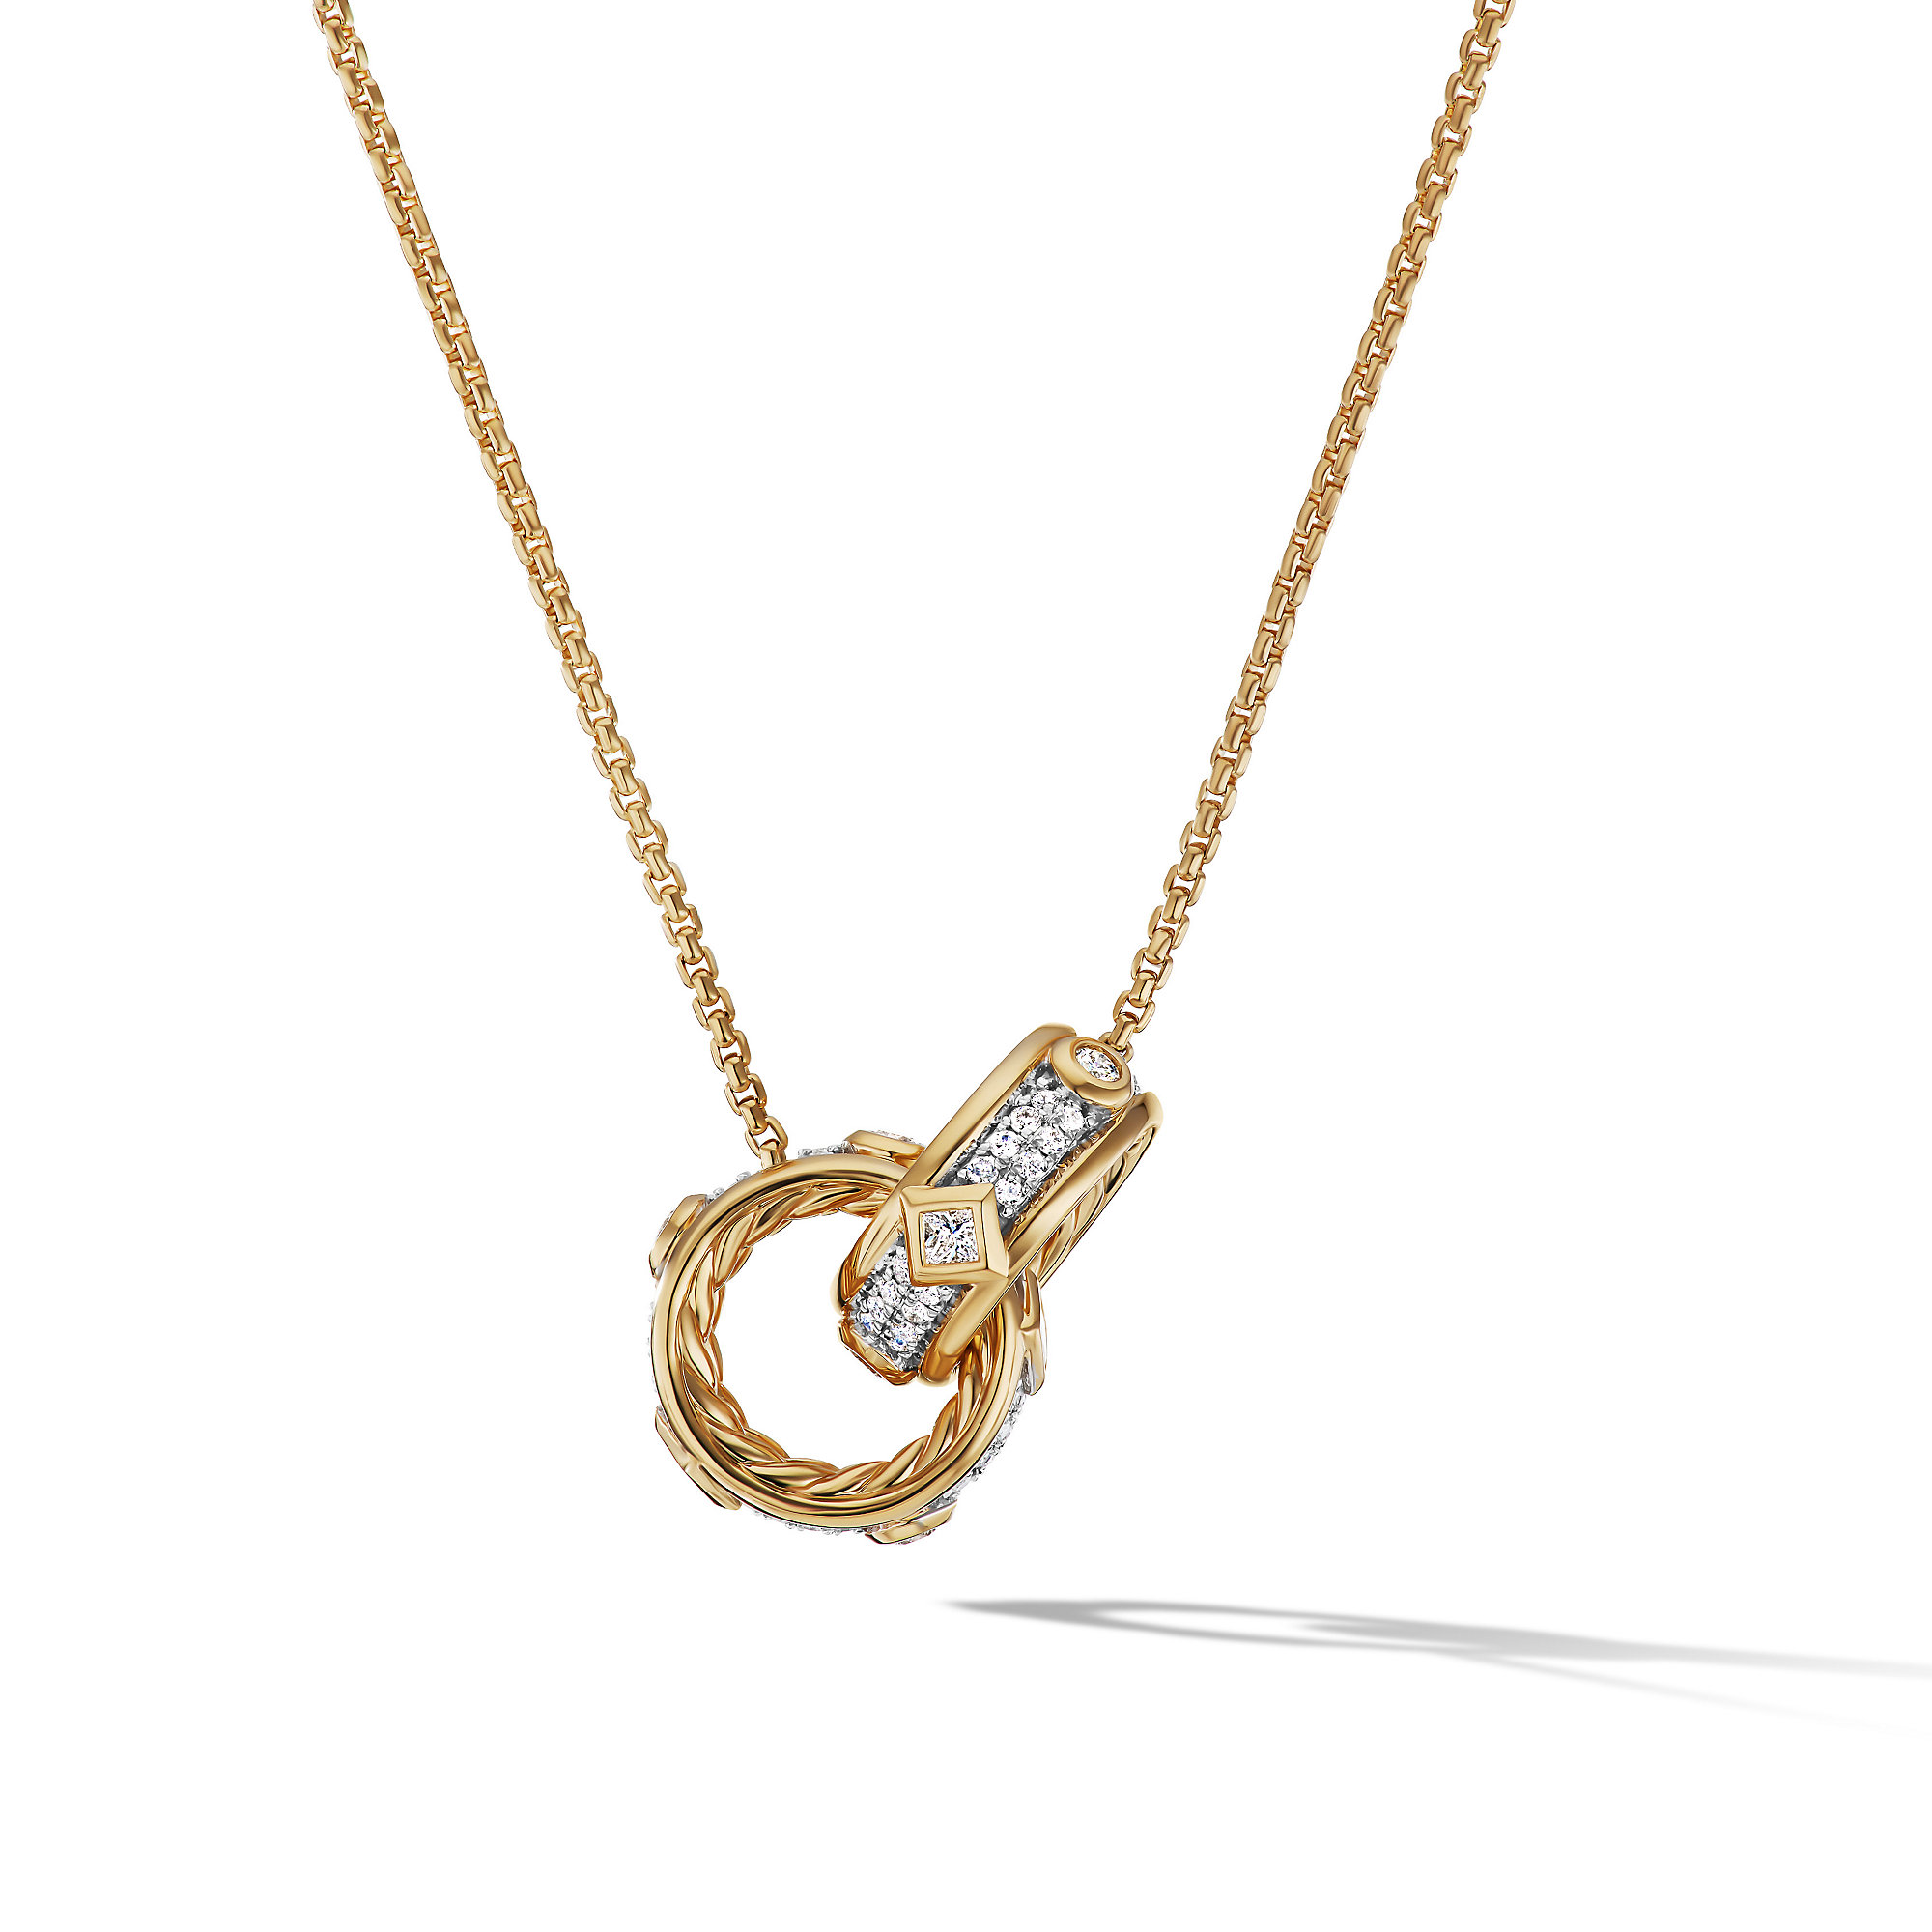 Modern Renaissance Double Pendant Necklace in 18K Yellow Gold with Full Pave Diamonds